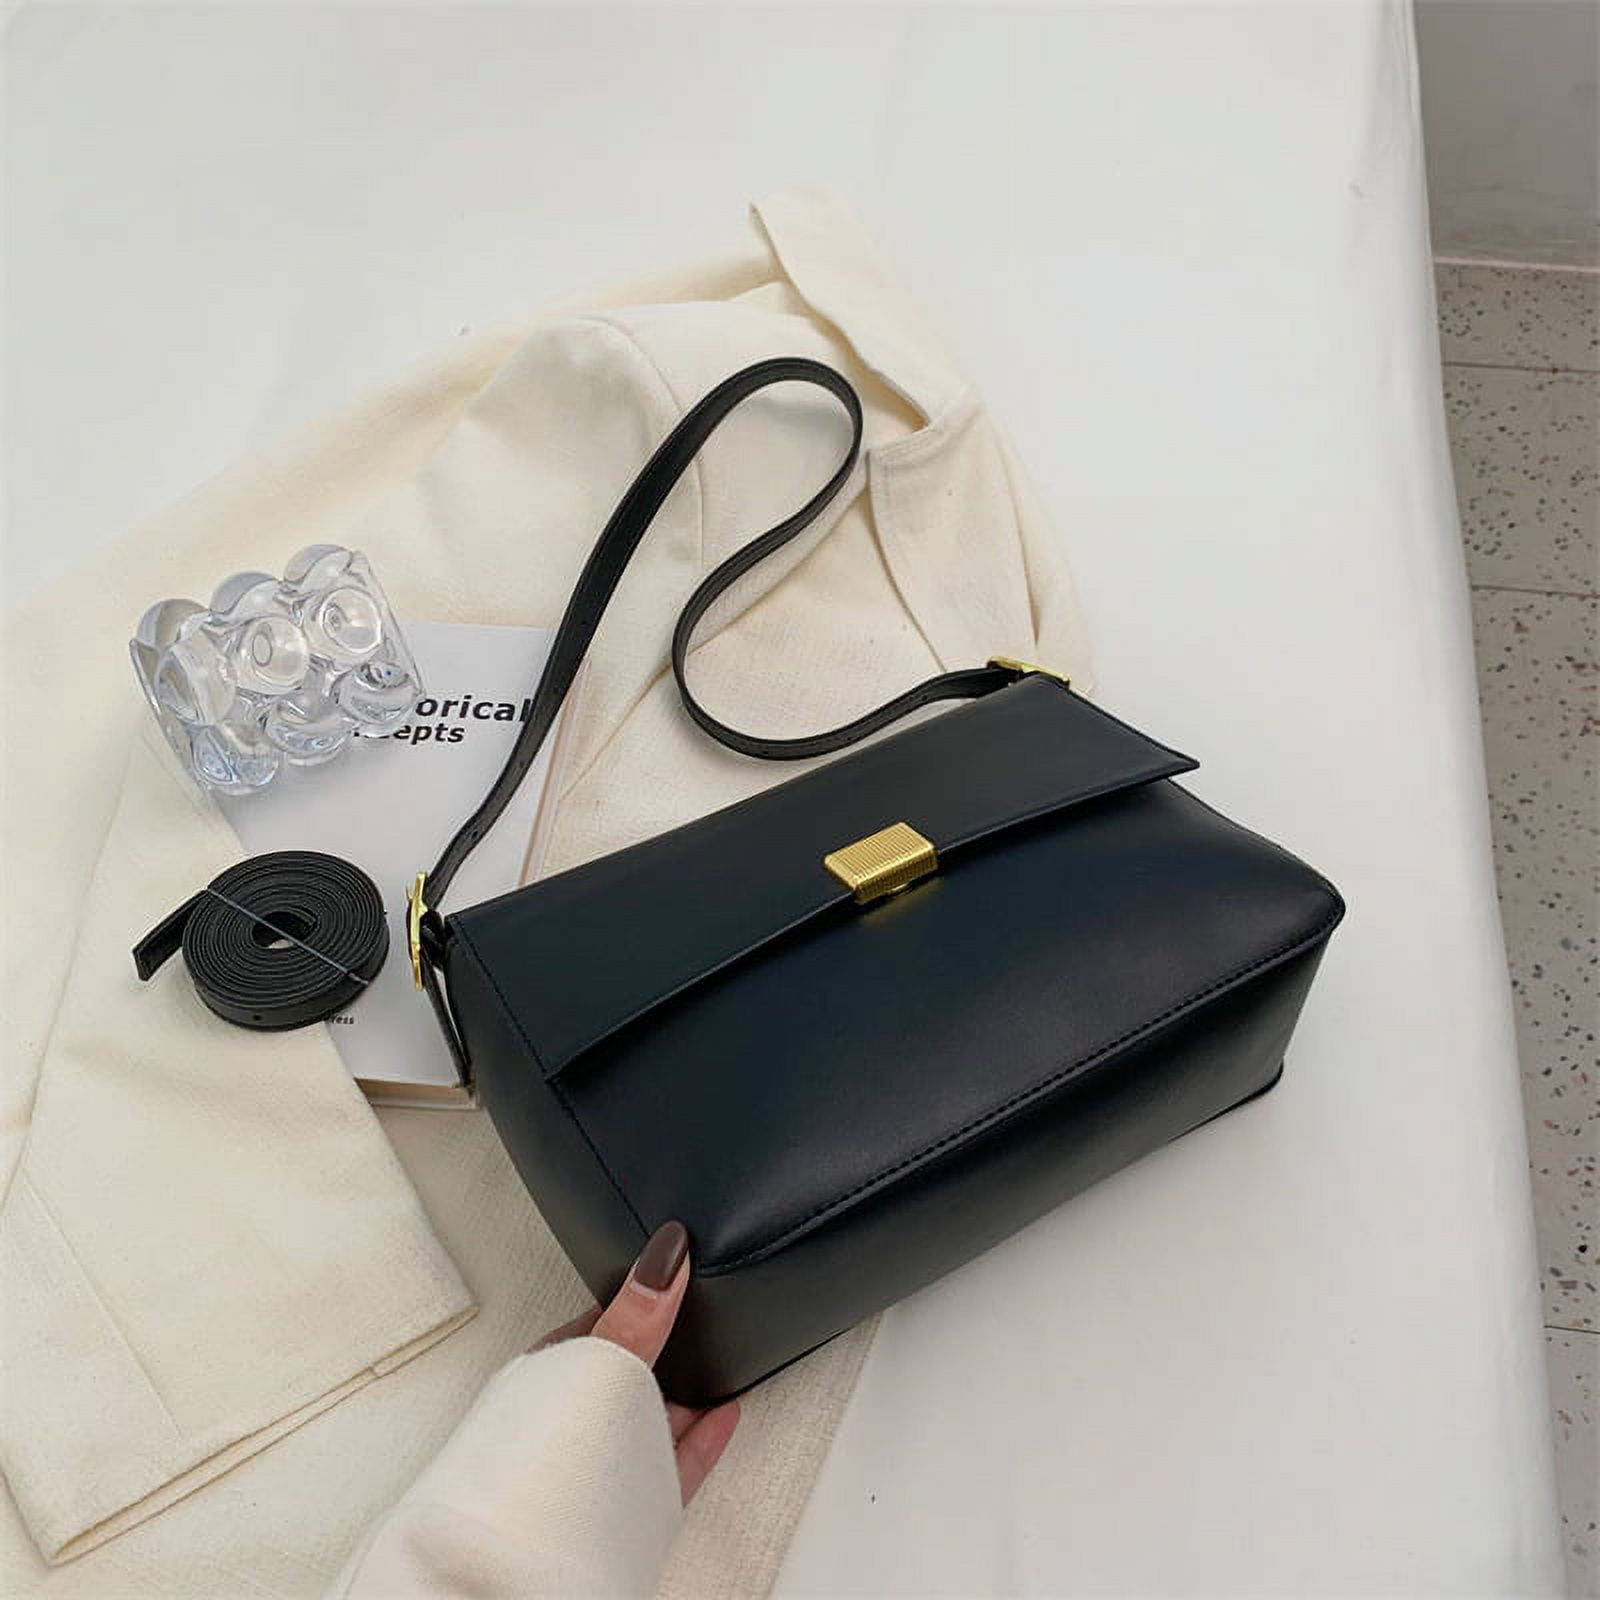 Autumn and Winter Bags Women New Fashion Korean Style Shoulder Bag